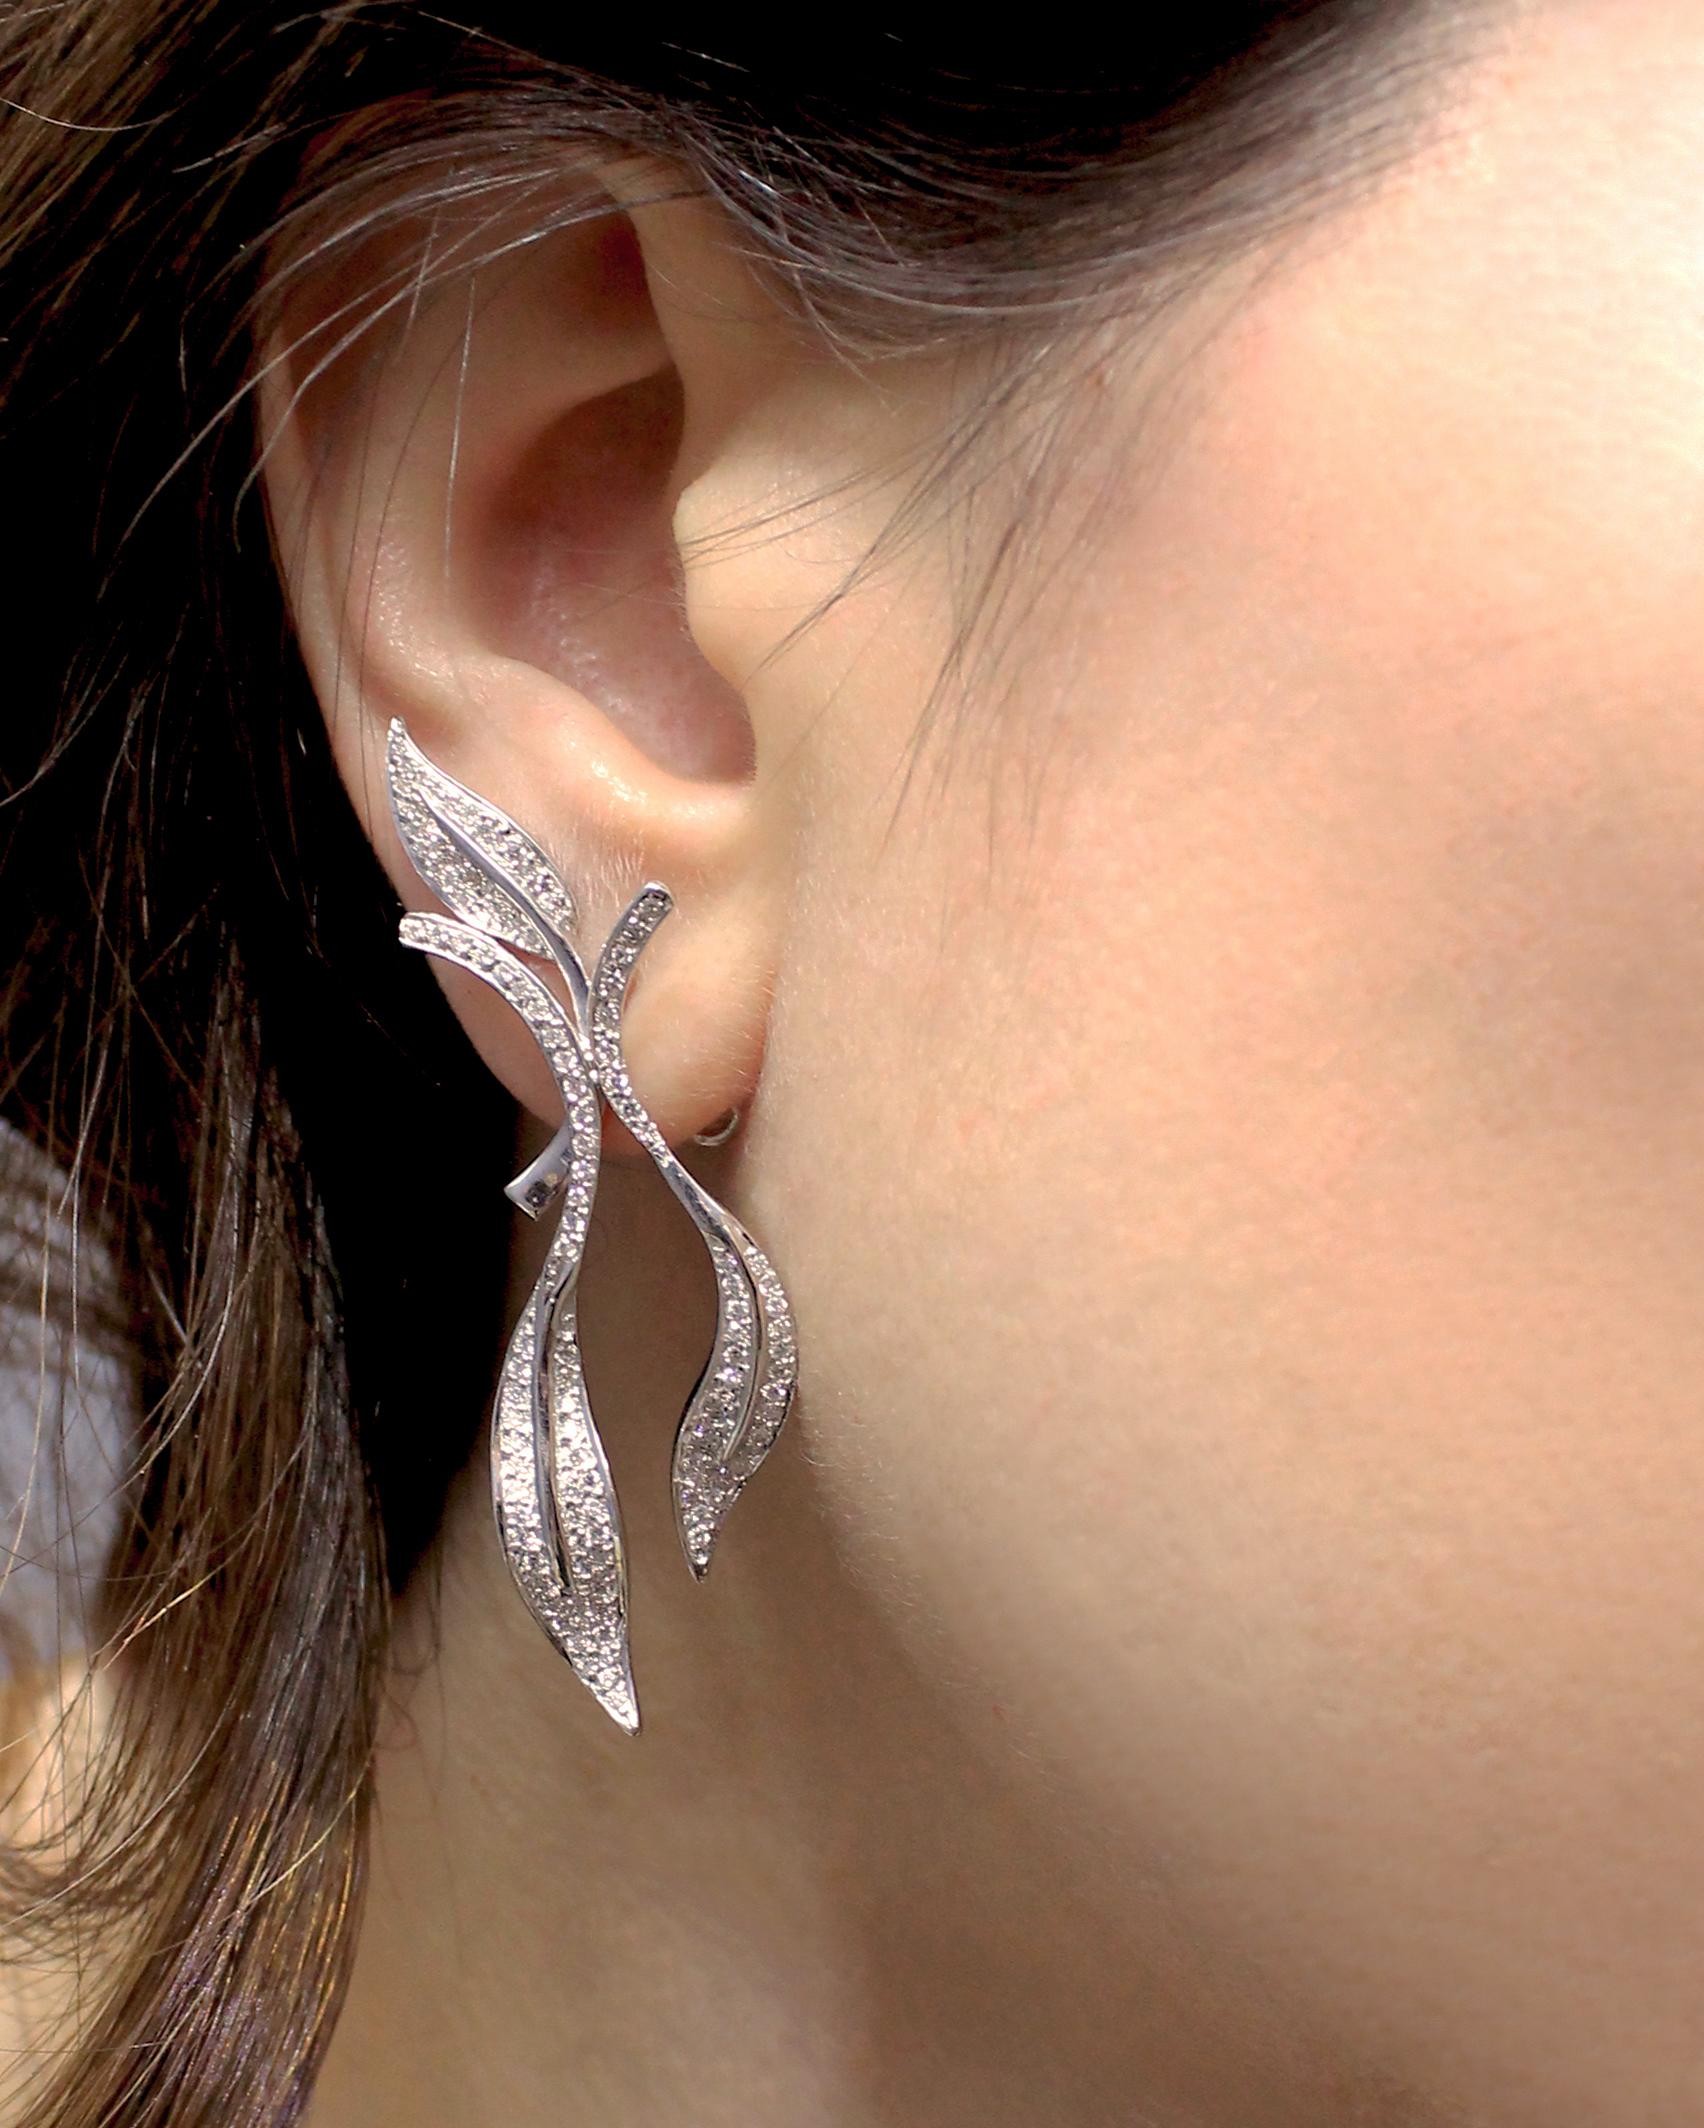 These Earrings are made in 18K White Gold and Diamonds ( see below technical features). 
Currently made by order manufacturing period time will be 1 month.

Contemporary 18K White Gold
Technical features: 
239 Diamonds, Total weight of Diamonds: